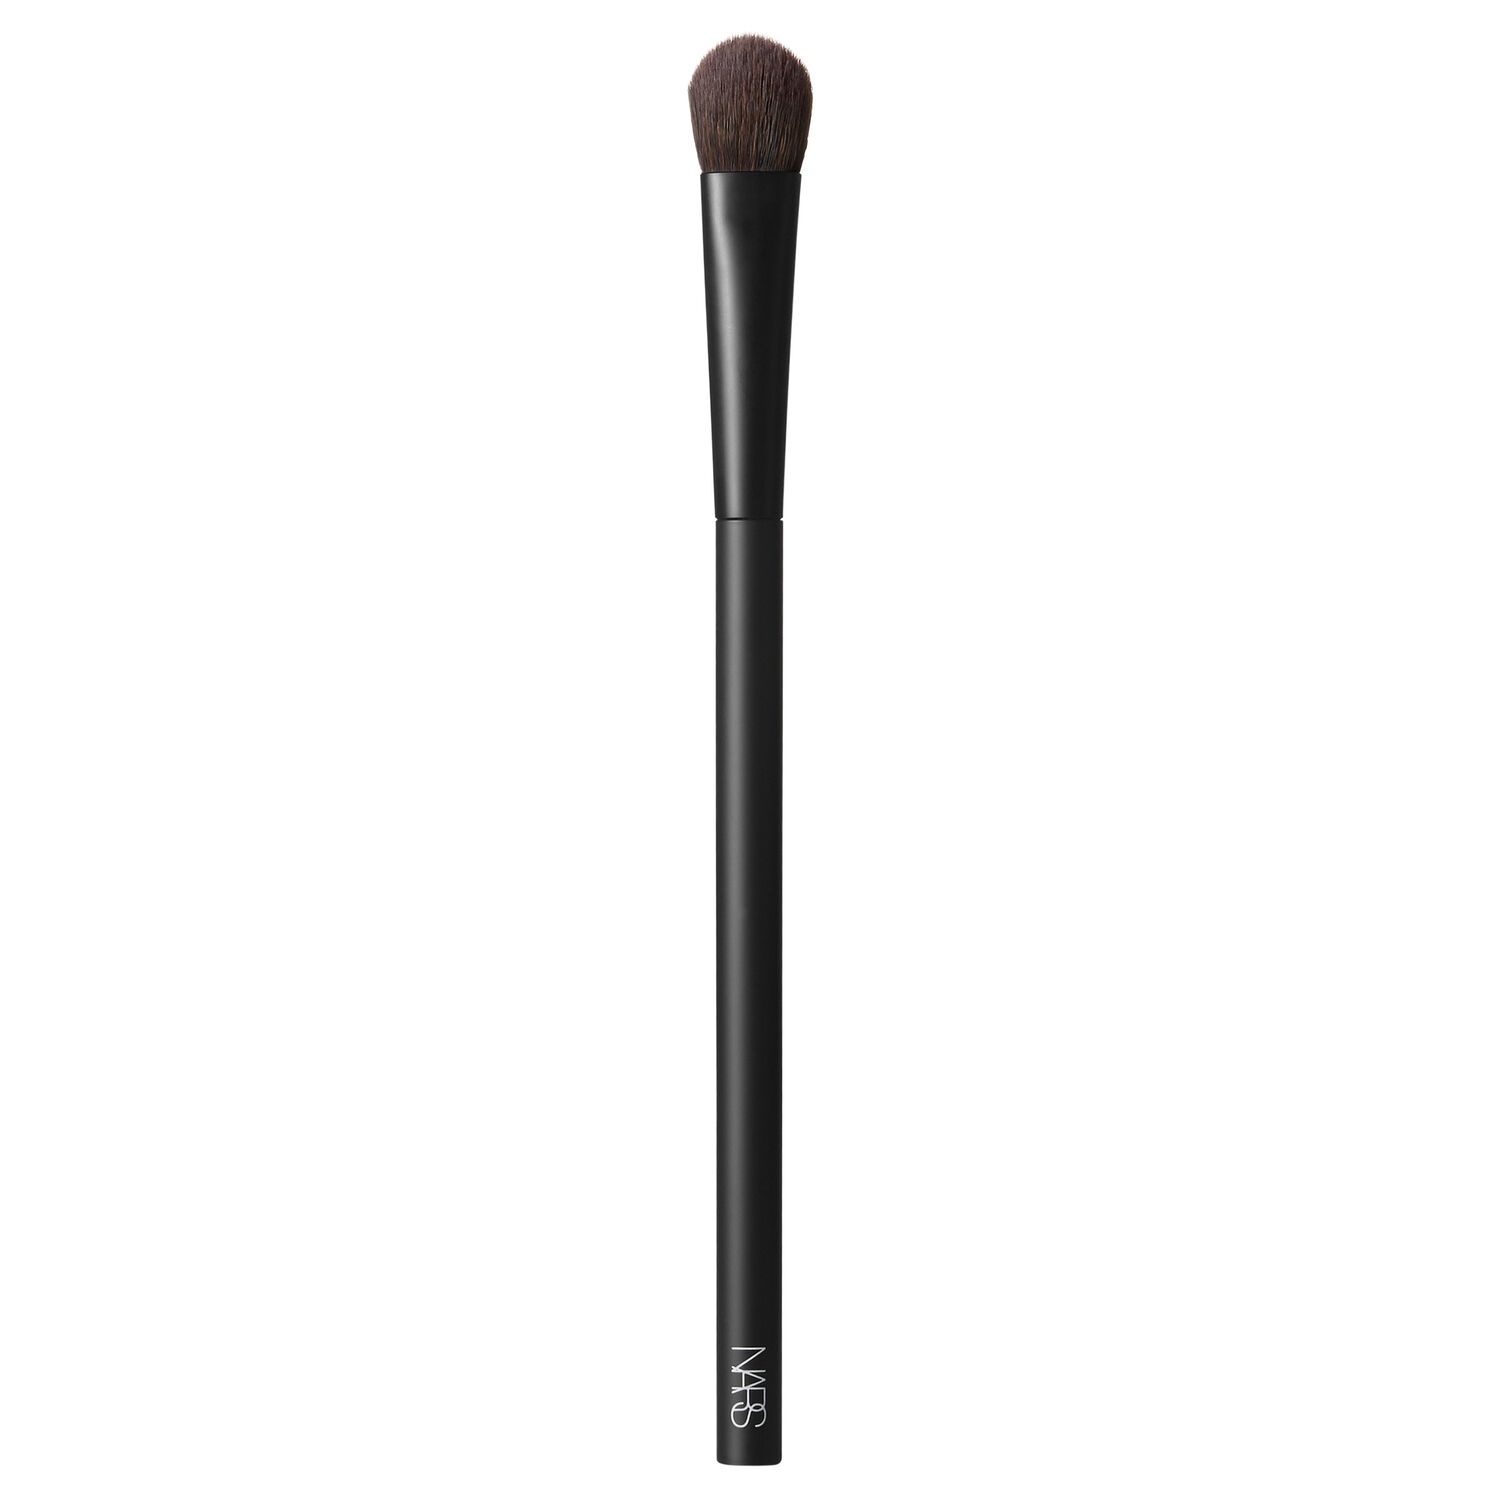 Nars Makeup Brushes: What For?